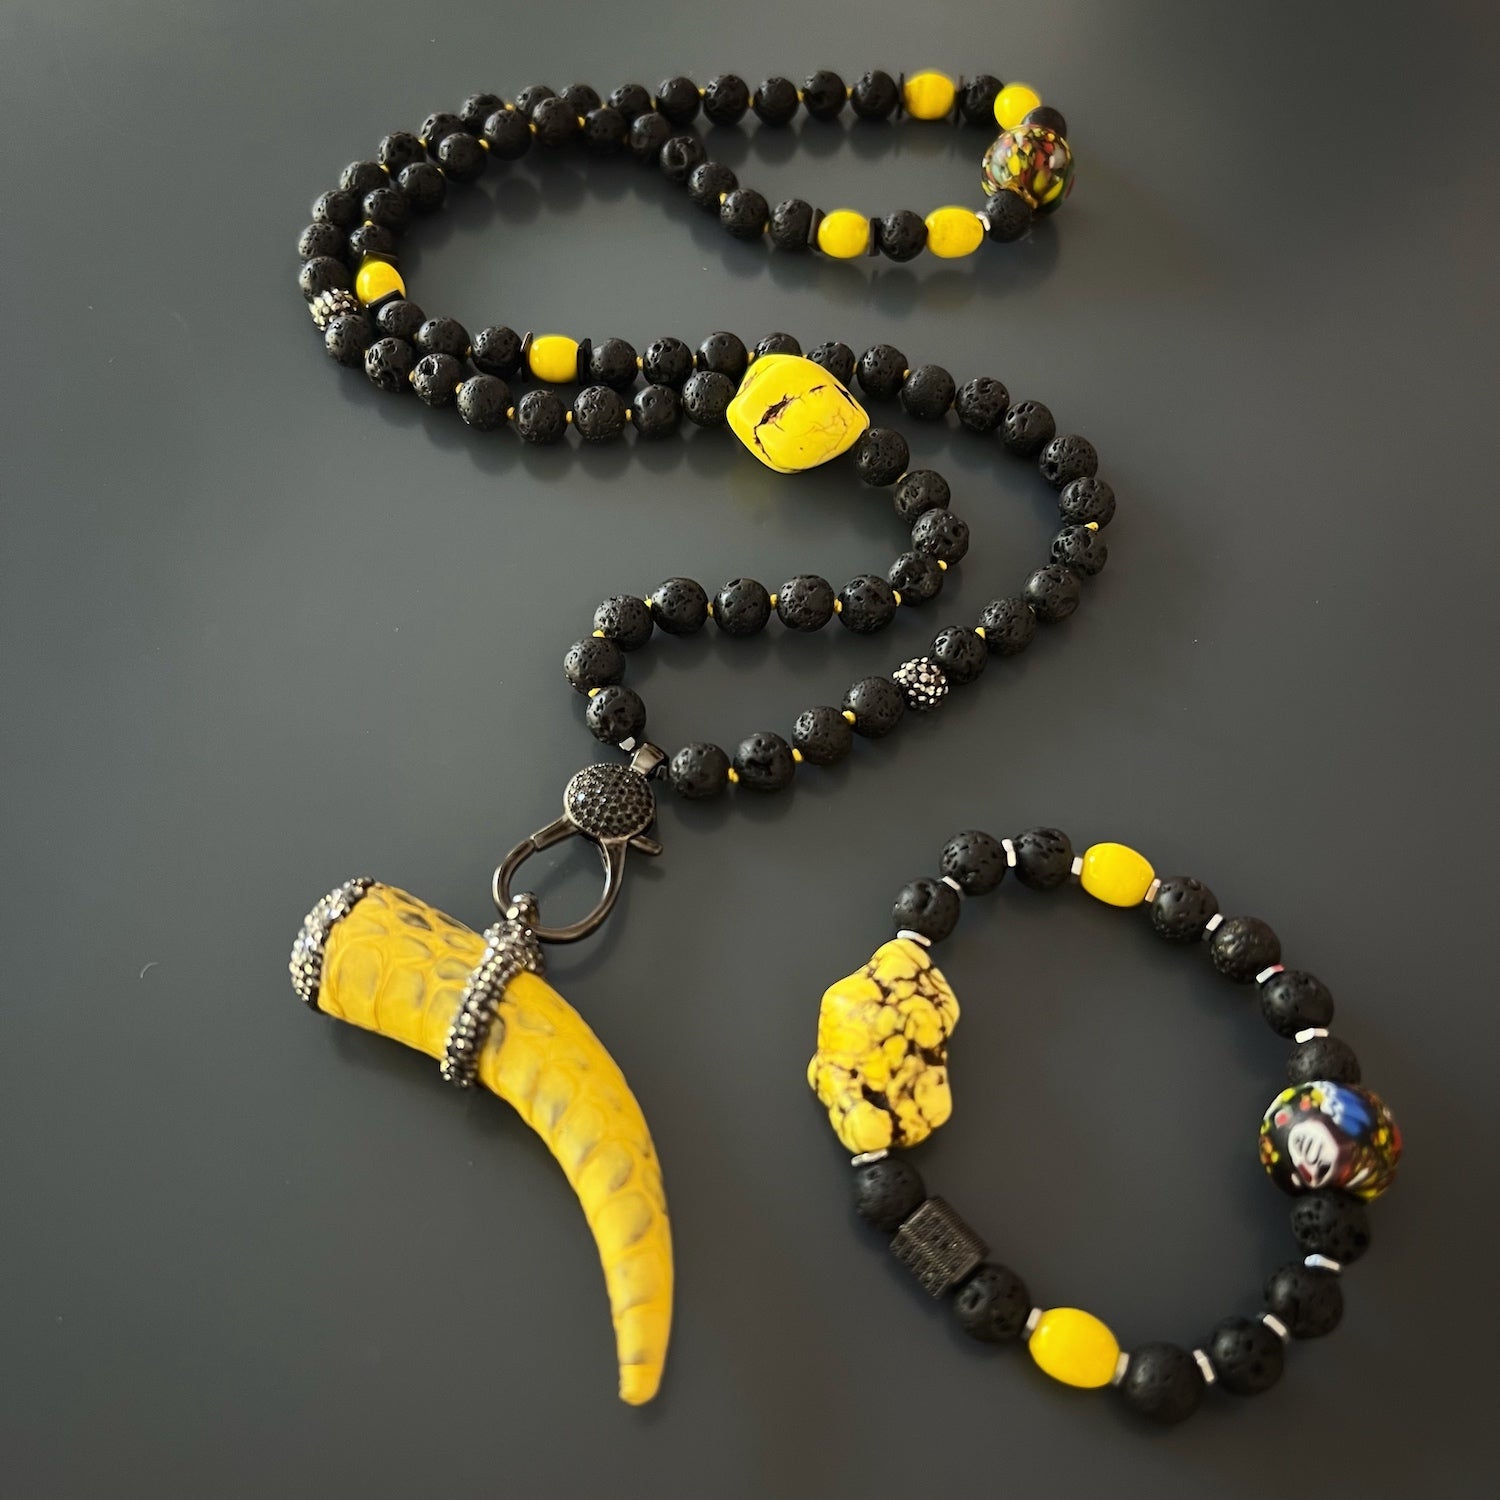 Vibrant yellow and zircon Cornicello pendant, a symbol of protection and good luck, catching the light in the Spirit Cornicello Unique Necklace.